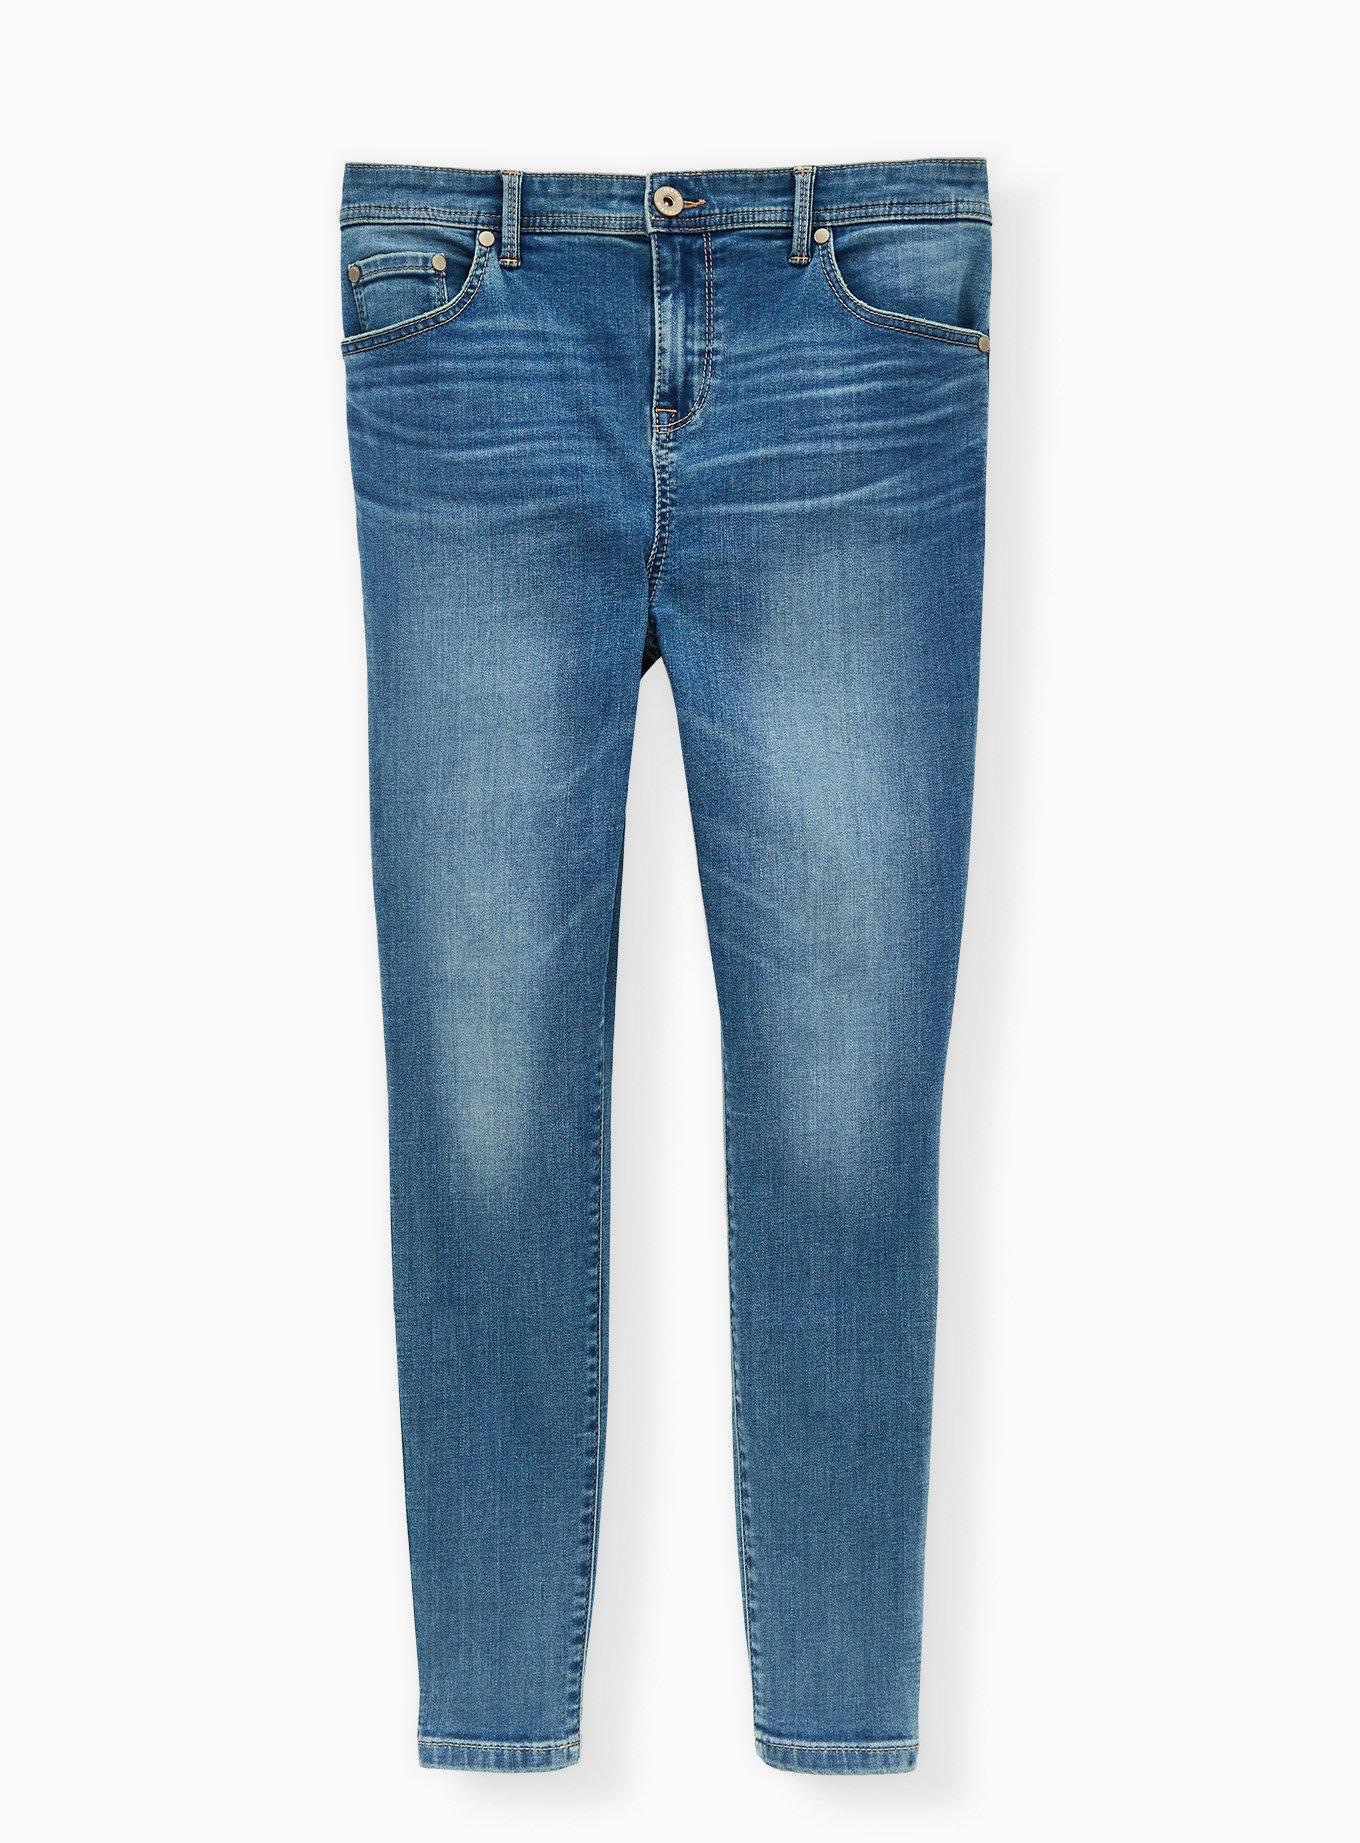 Tanga SKINY in denim blue - Every Day In Cotton Retro Collection